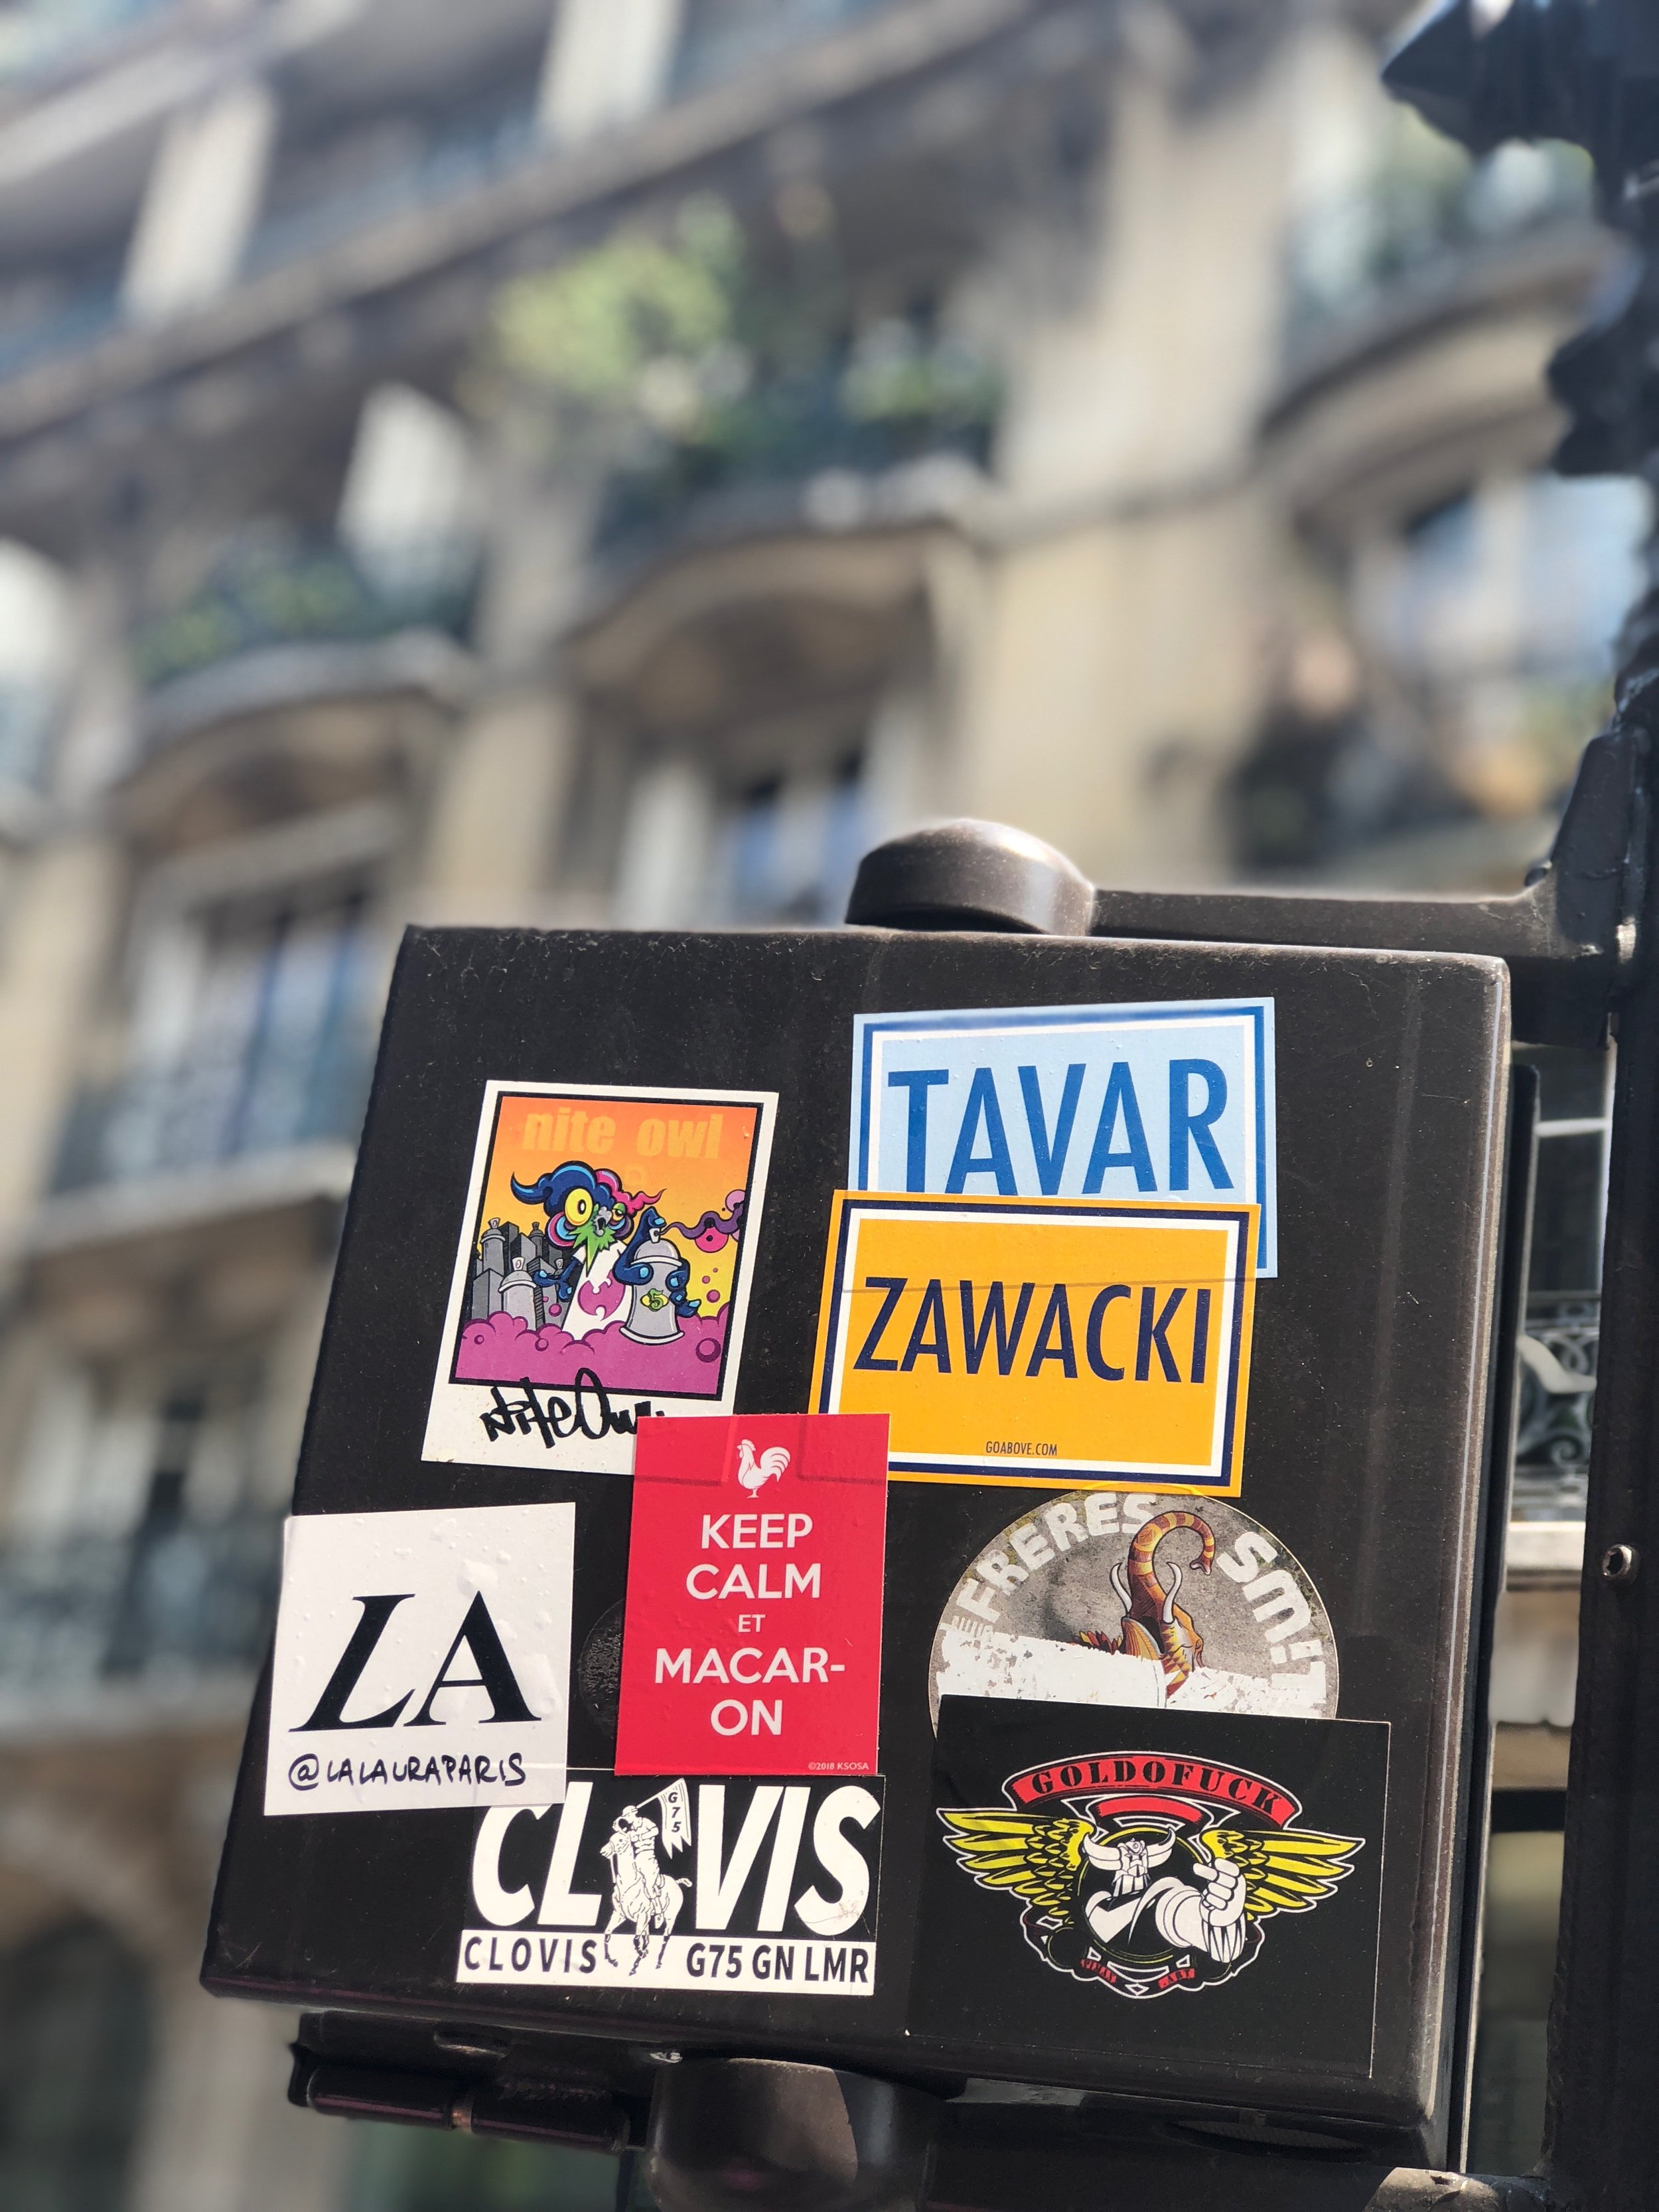  Rue des Archives Paris, France July 26, 2018 Photo by KSosa  We're in France this week. Why not make a sticker just for them?&nbsp;🇨🇵️ 